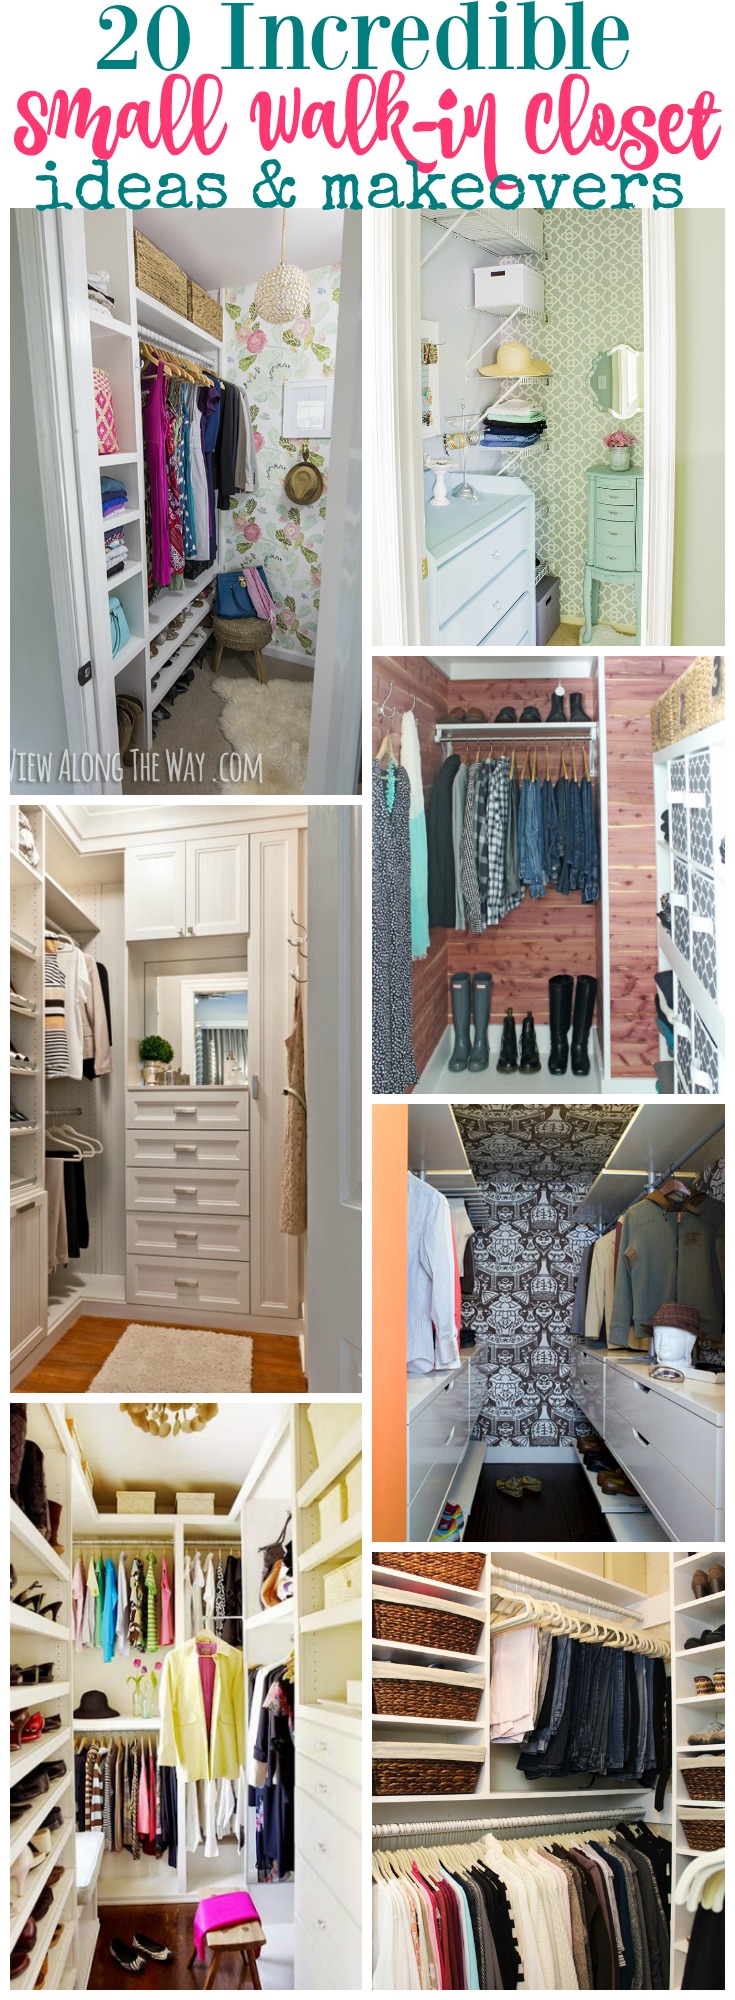 get-inspired-to-whip-your-closet-into-shape-with-these-20-incredible-small-walk-in-closet-ideas-and-makeovers